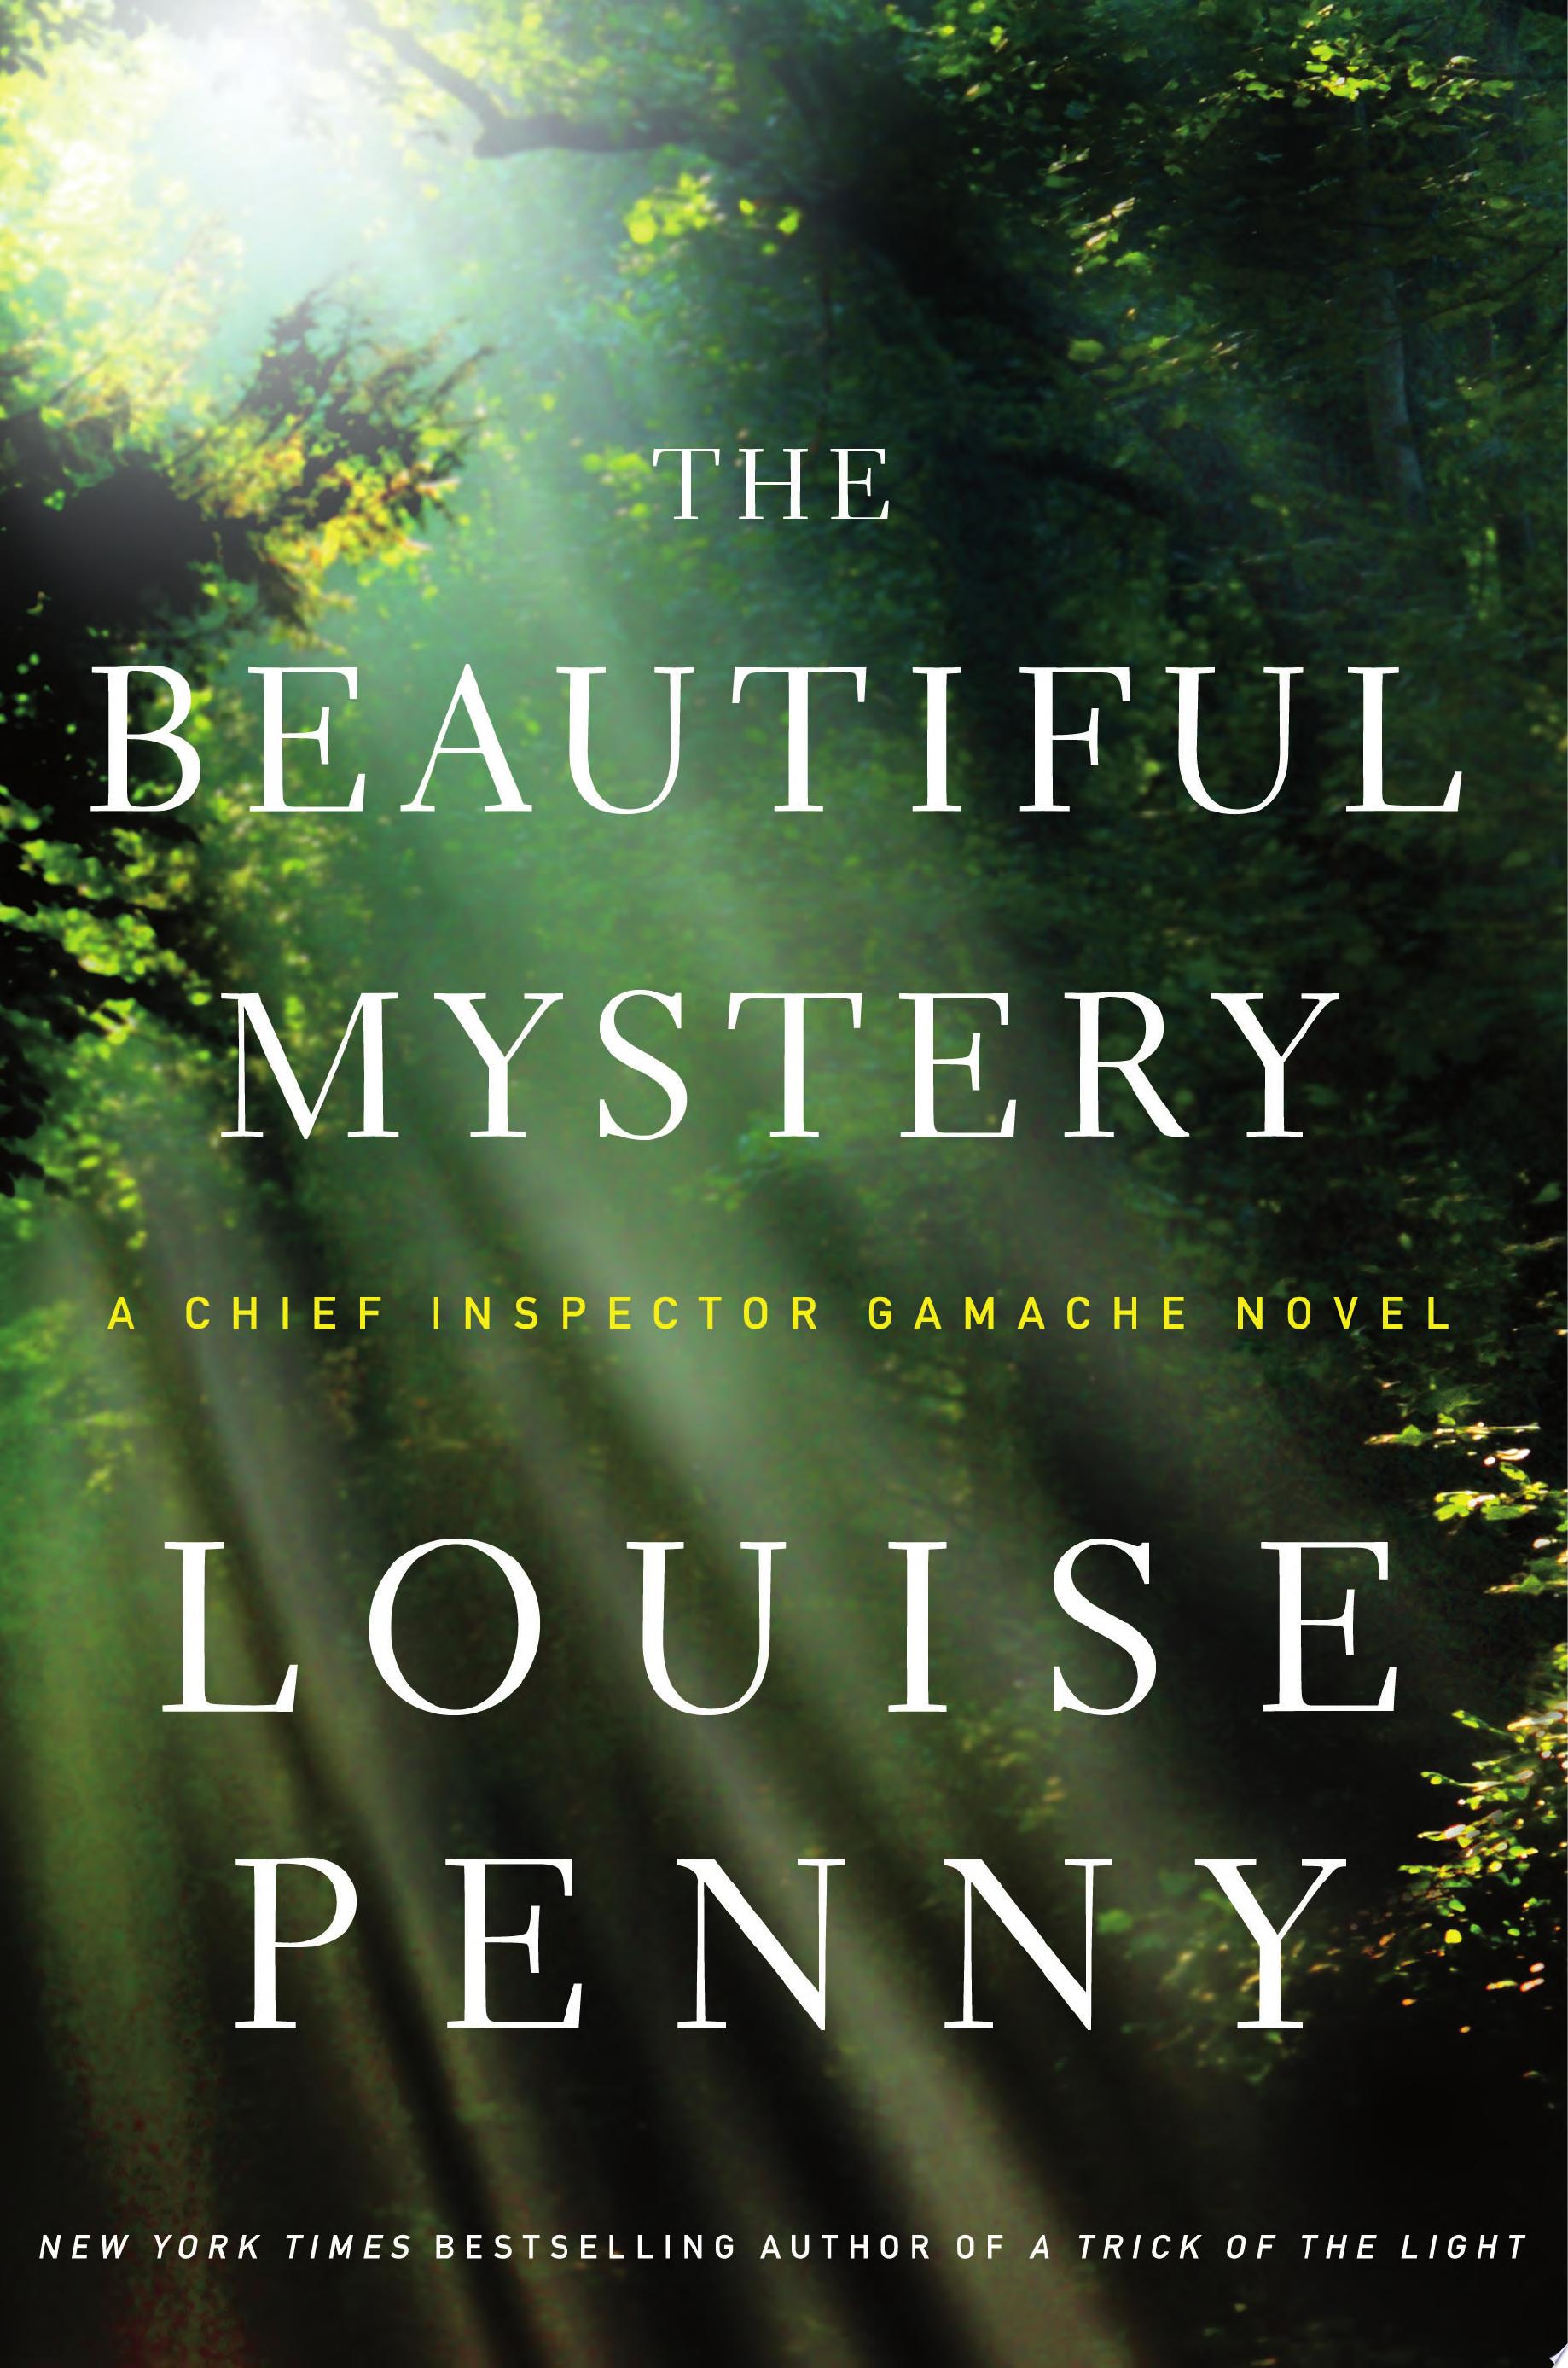 Image for "The Beautiful Mystery"